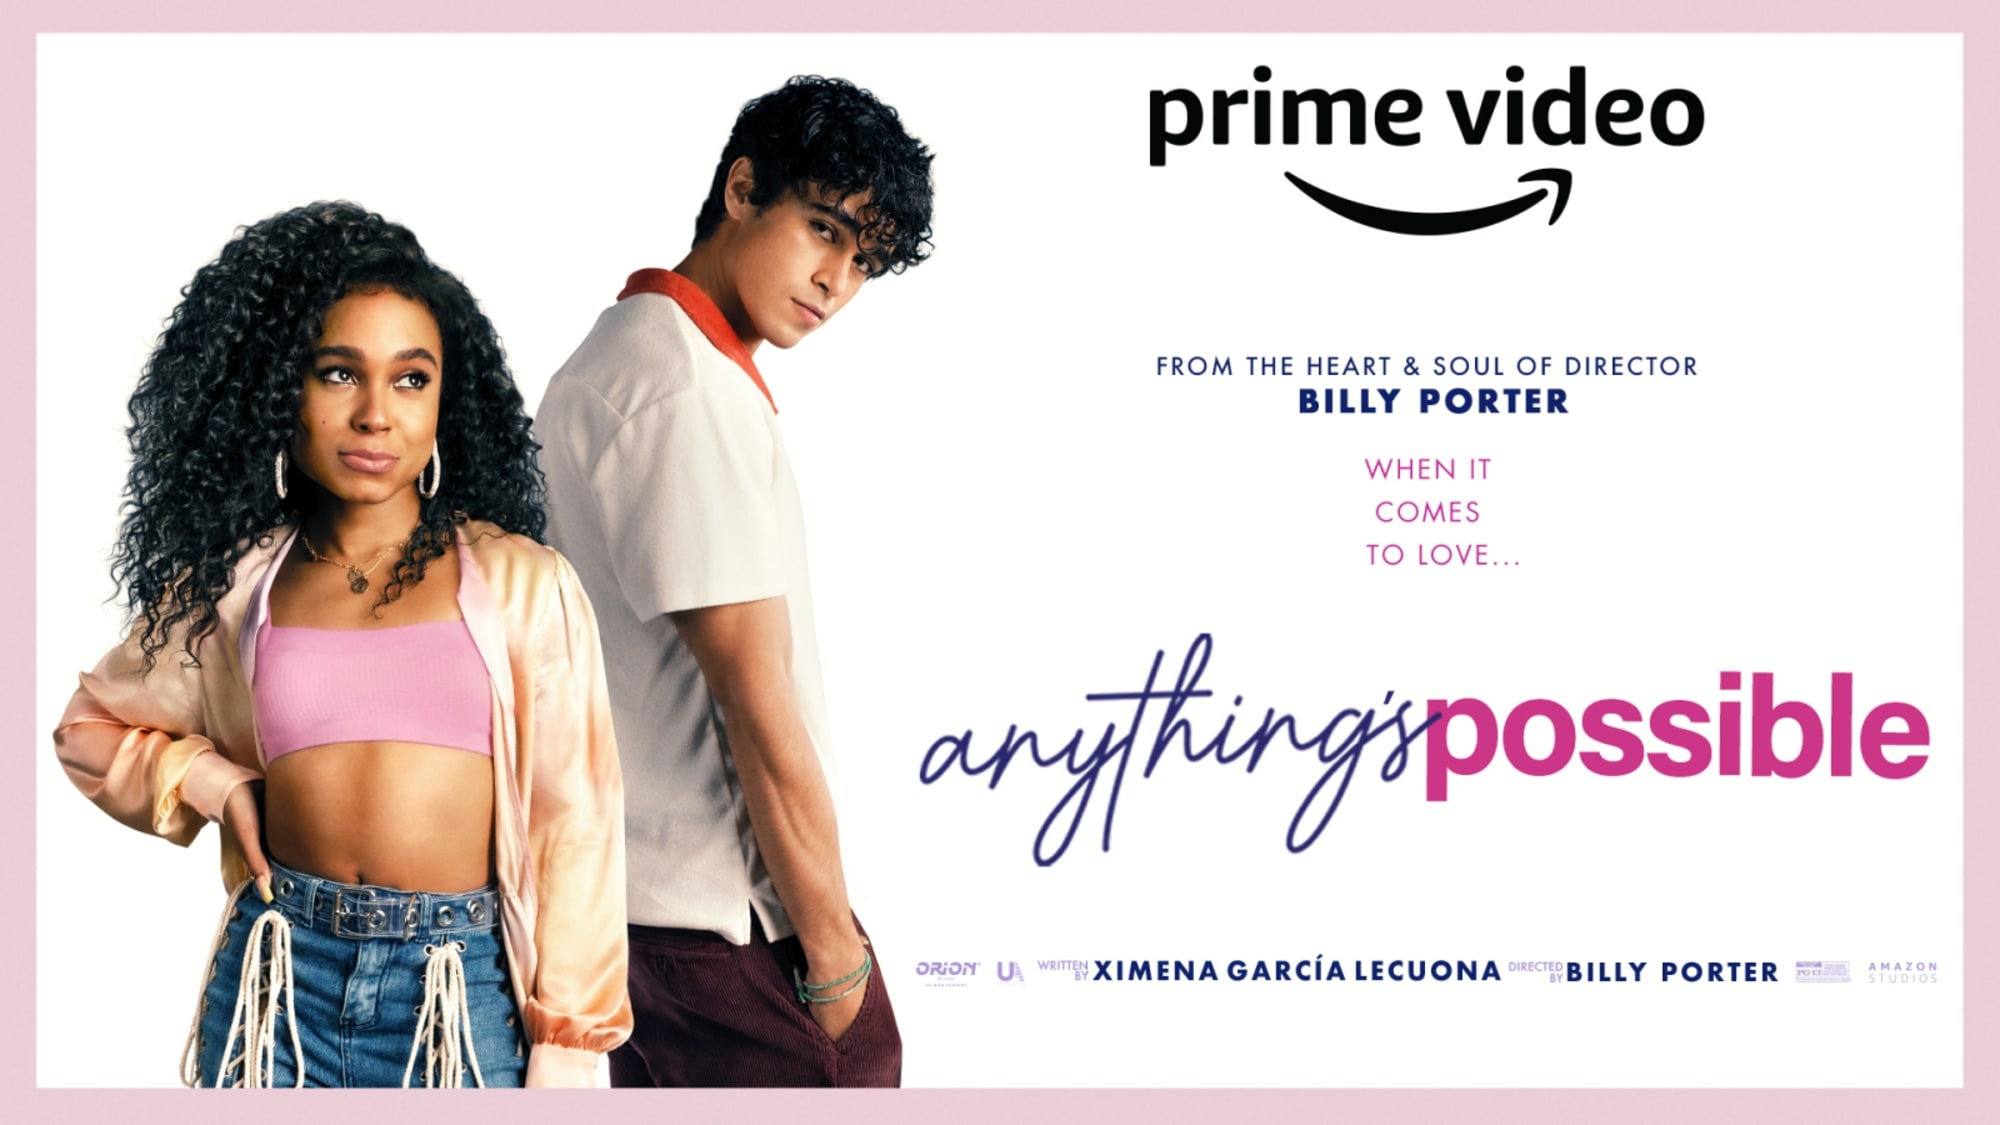 What time will Anything's Possible arrive on Prime Video?